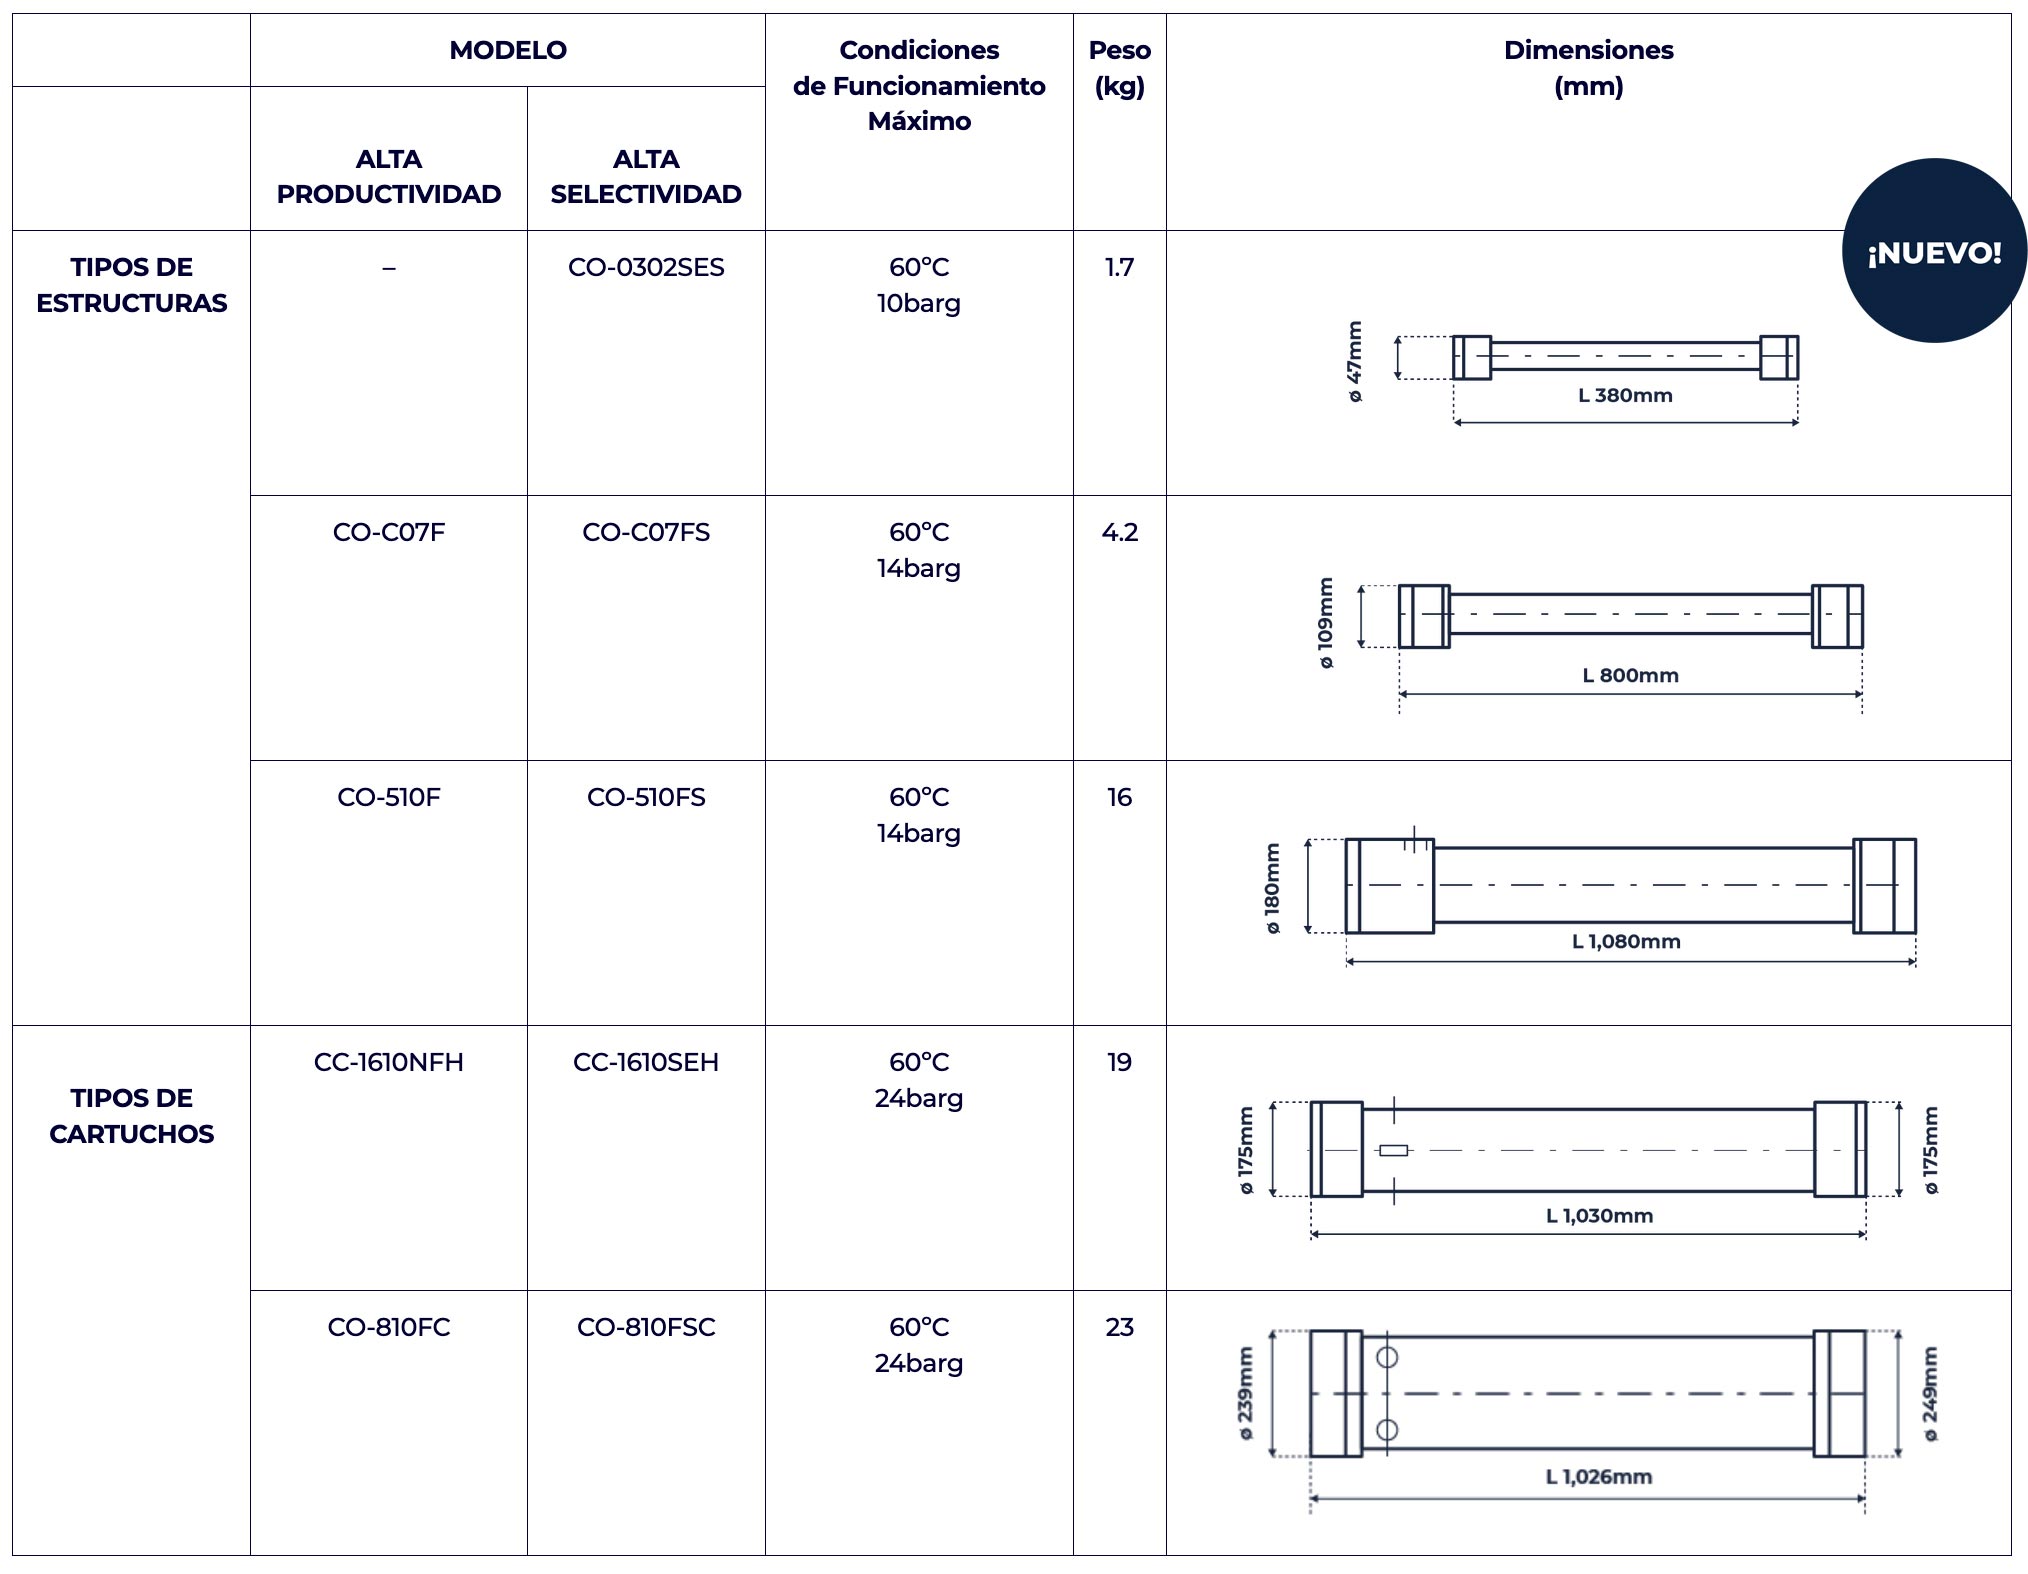 table with technical data of interest on gas separation membranes